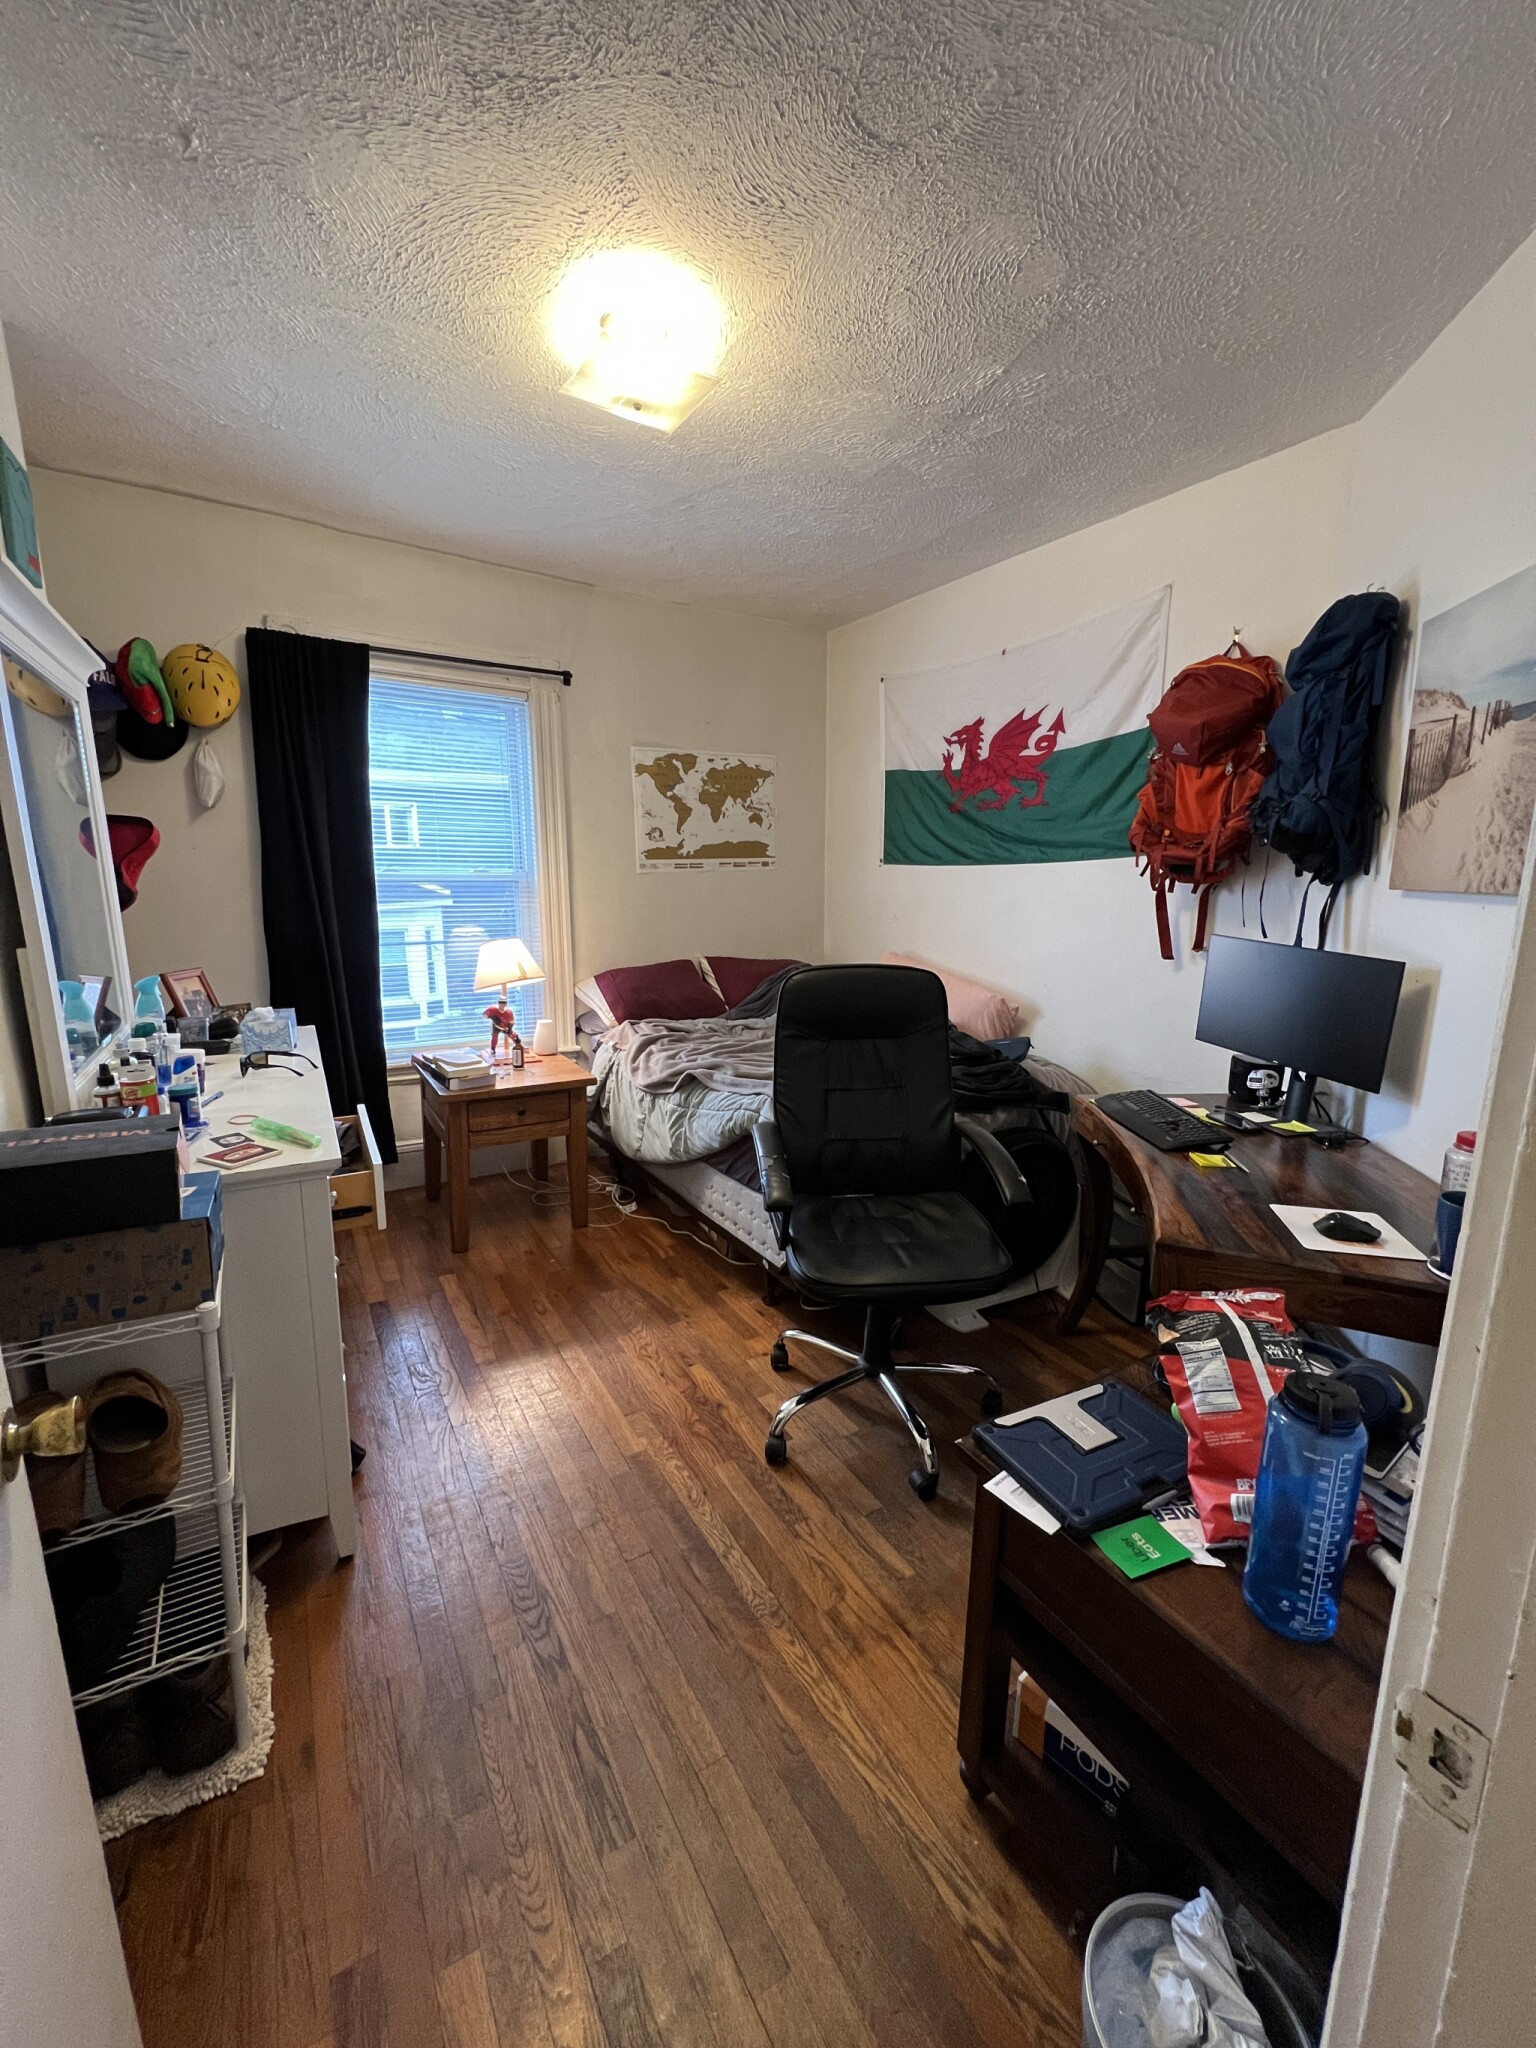 Photos of apartment on Osgood St.,Somerville MA 02143